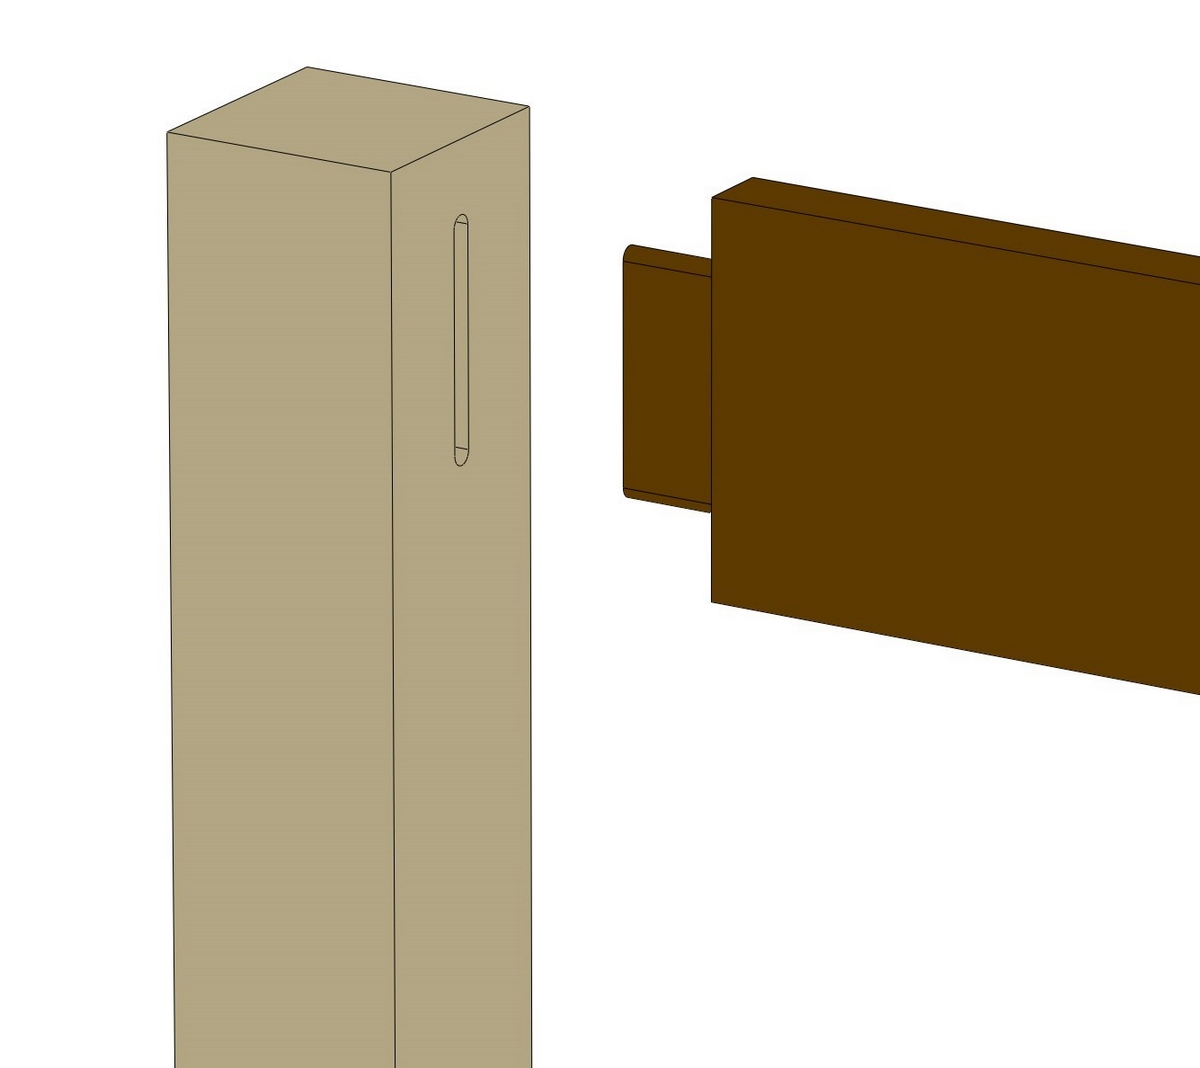 digital illustration of a mortise and tenon joint